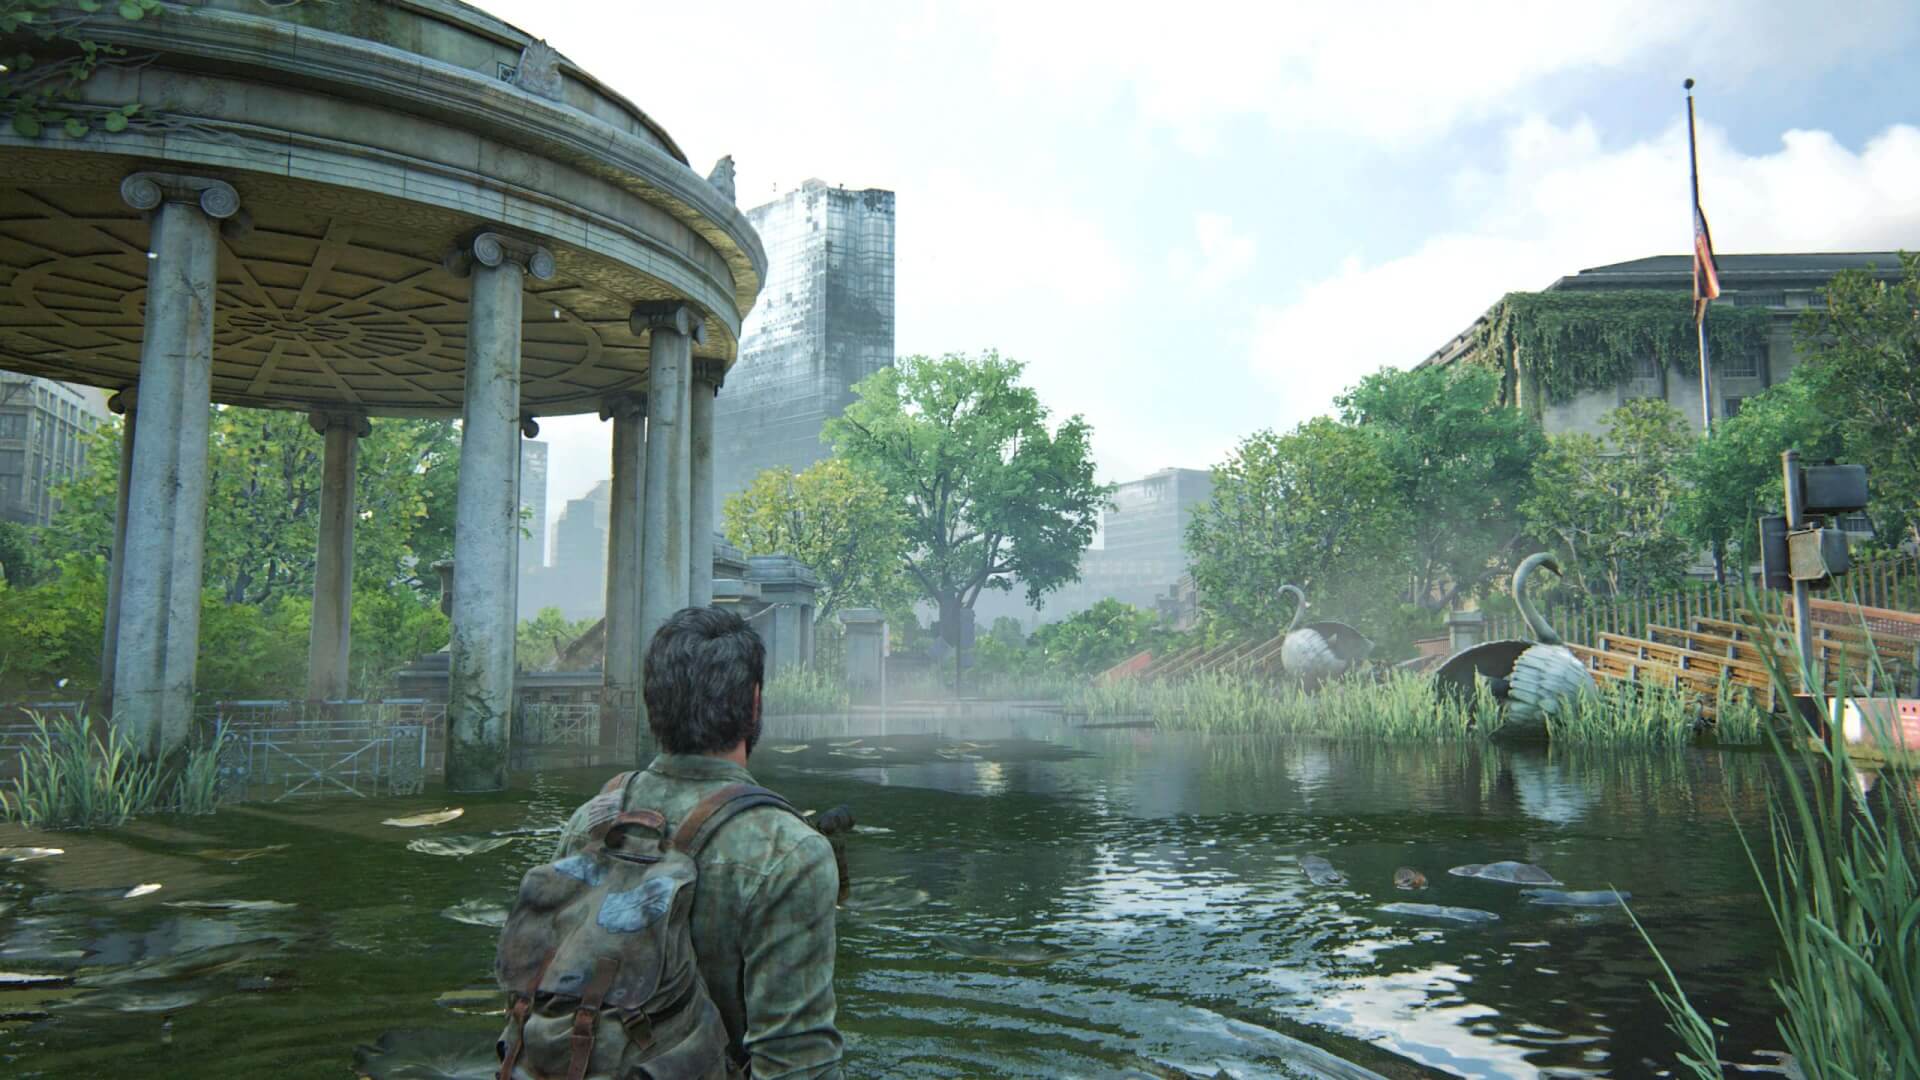 The Last Of Us , PS3 gameplay 